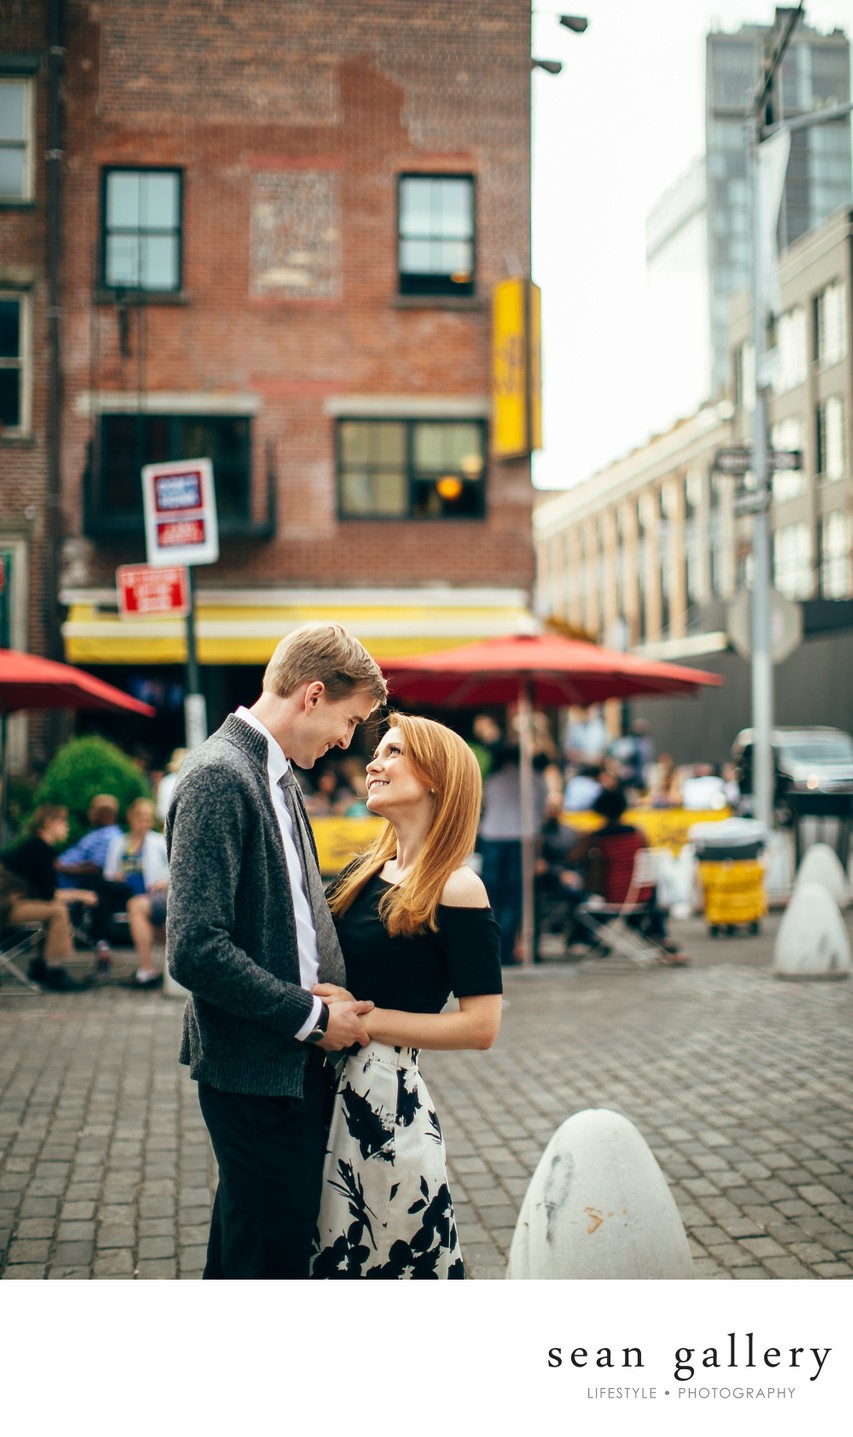 Meat Packing in nyc engagement photos